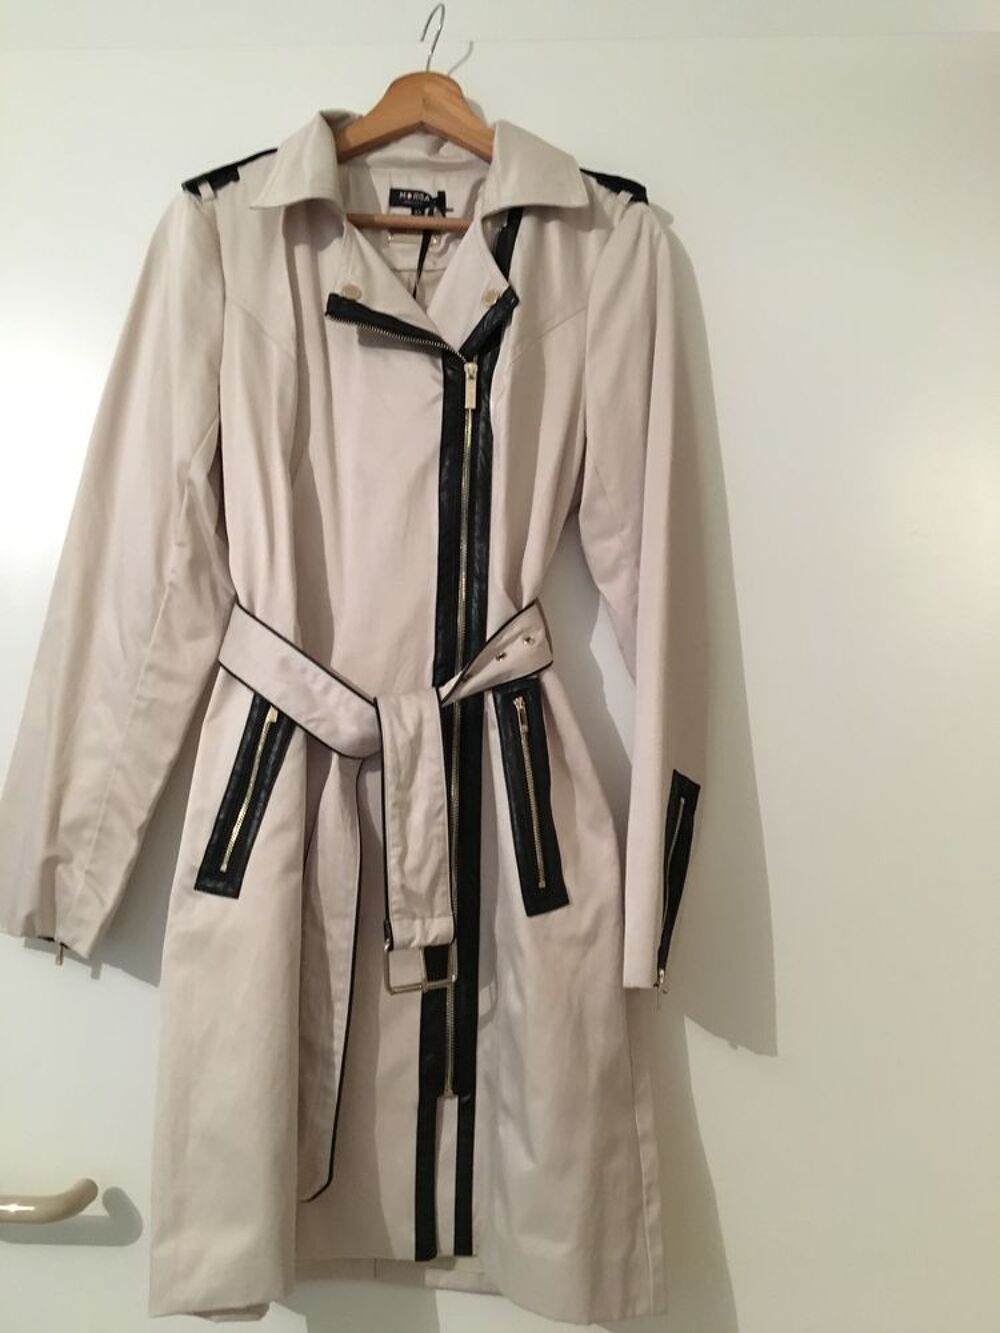 NEUF TRENCH BEIGE MARQUE MORGAN Vtements